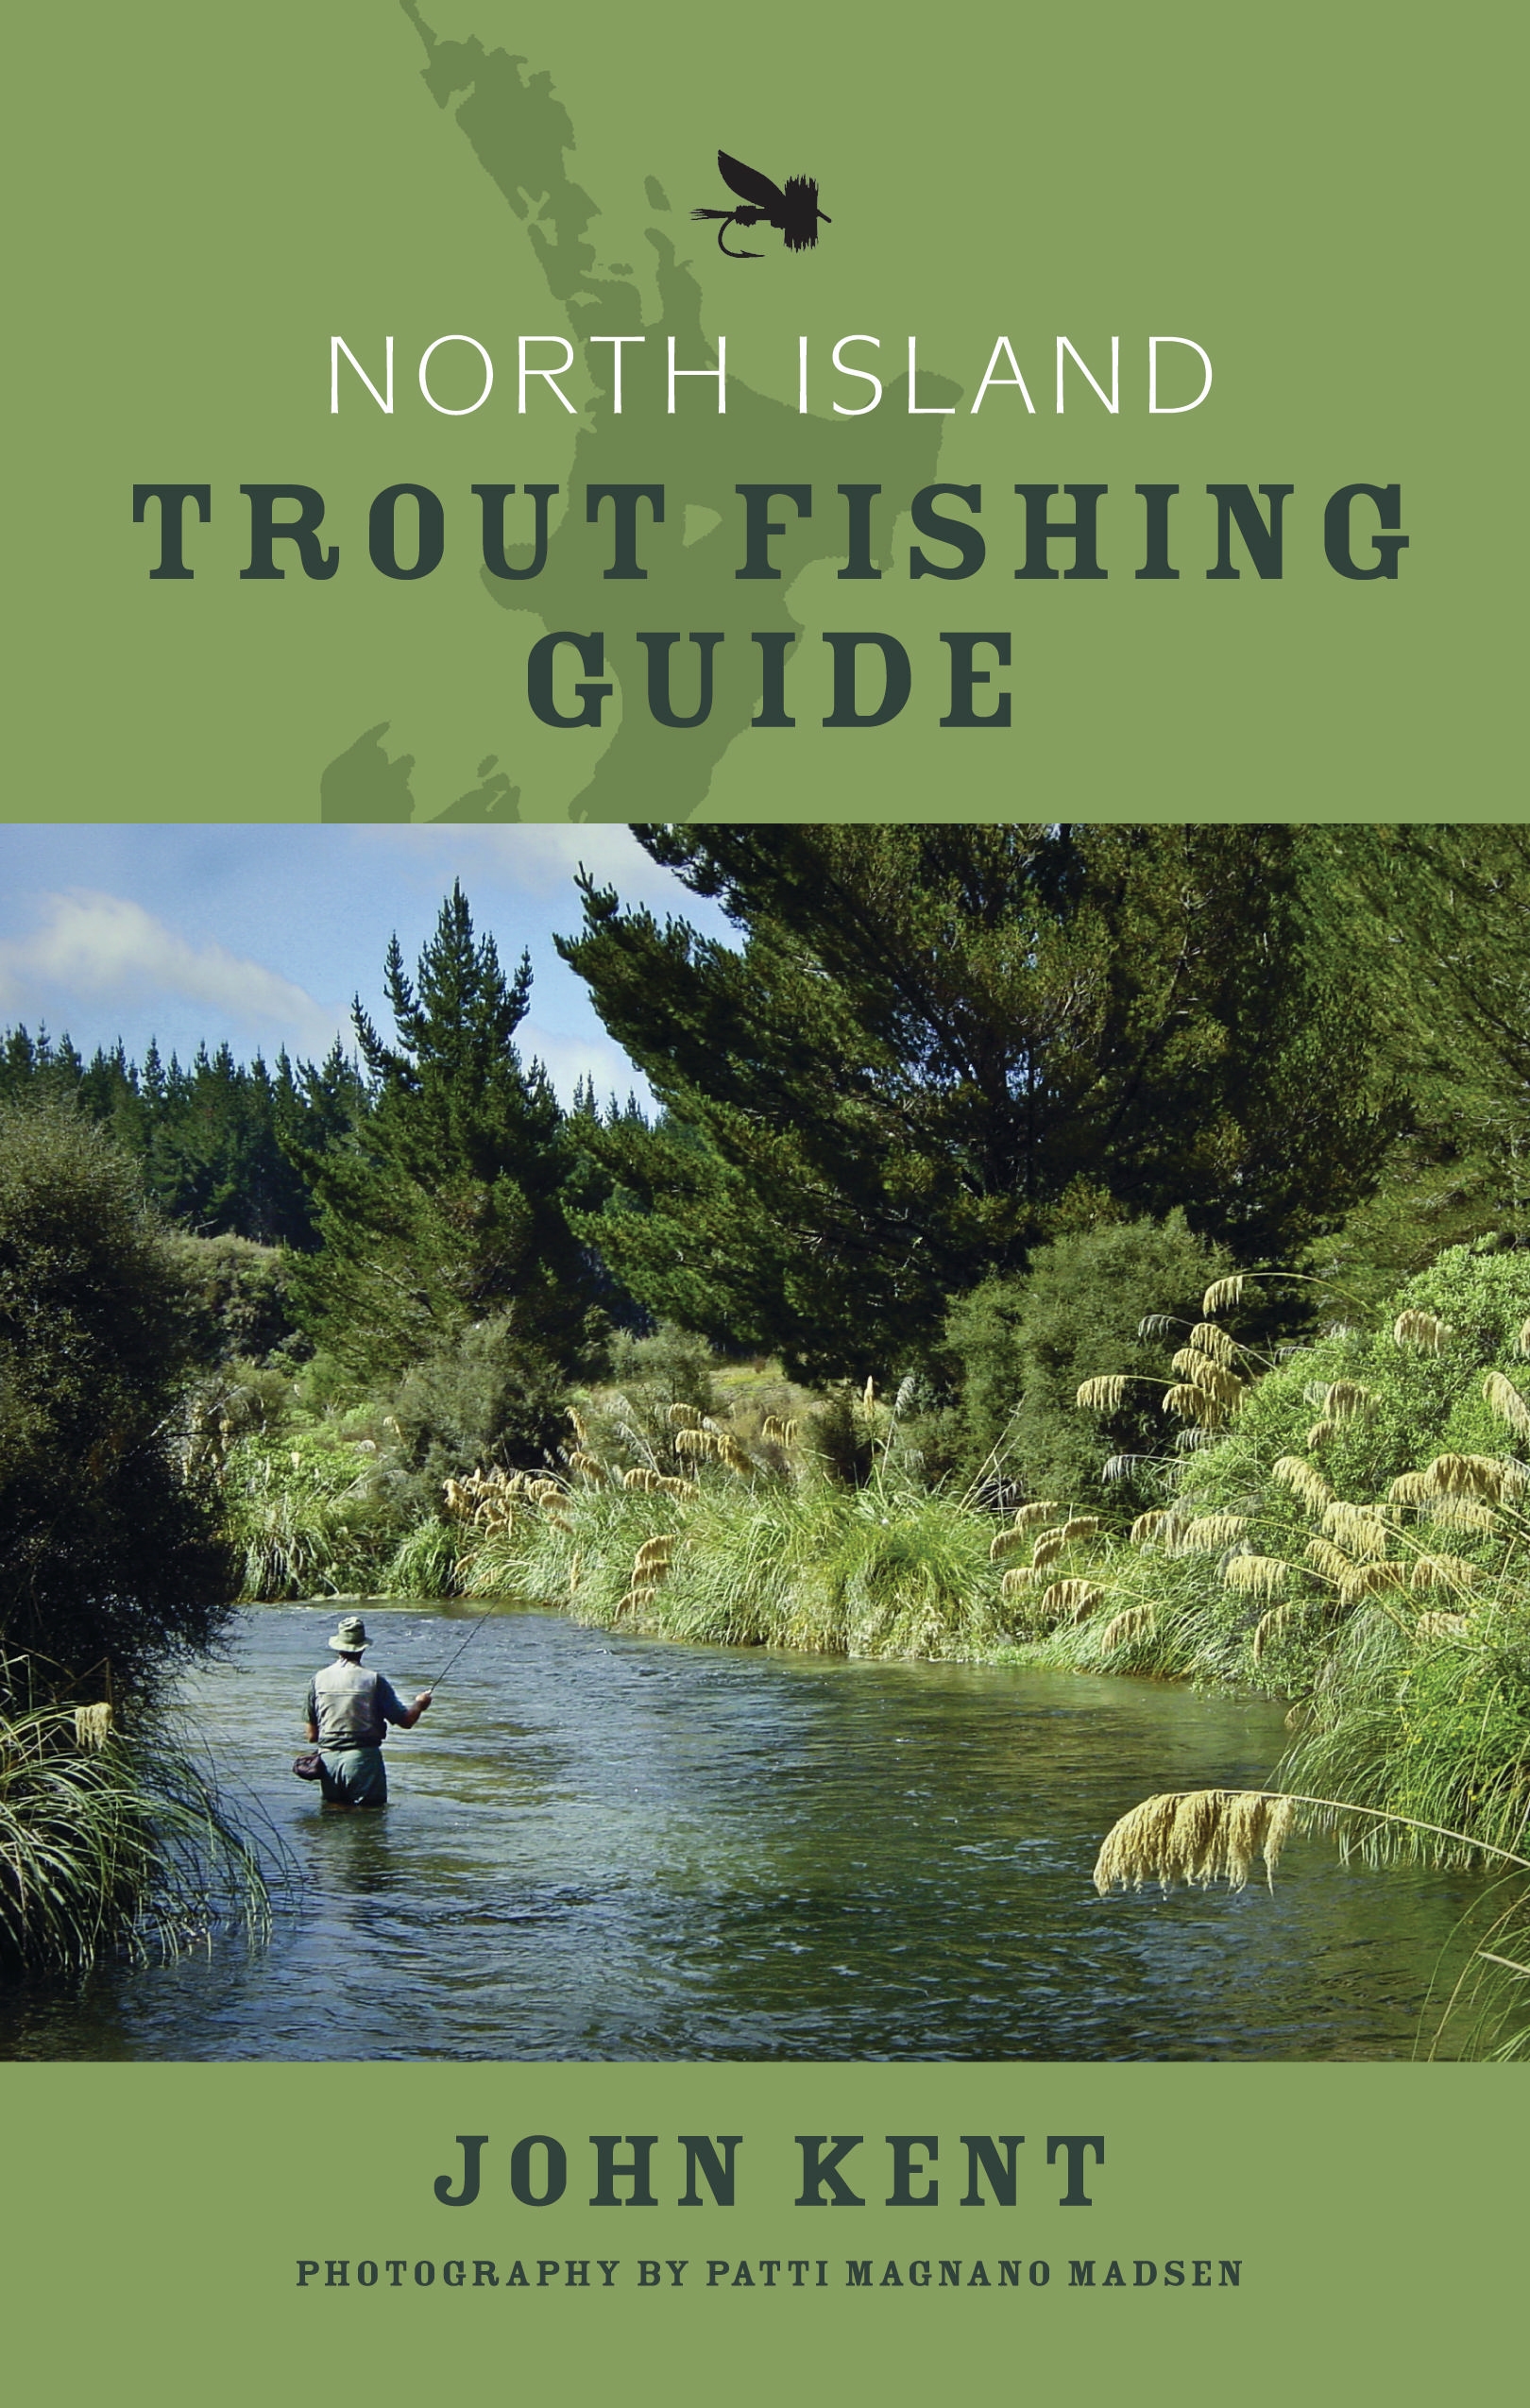 North Island Trout Fishing Guide by John Kent - Penguin Books New Zealand